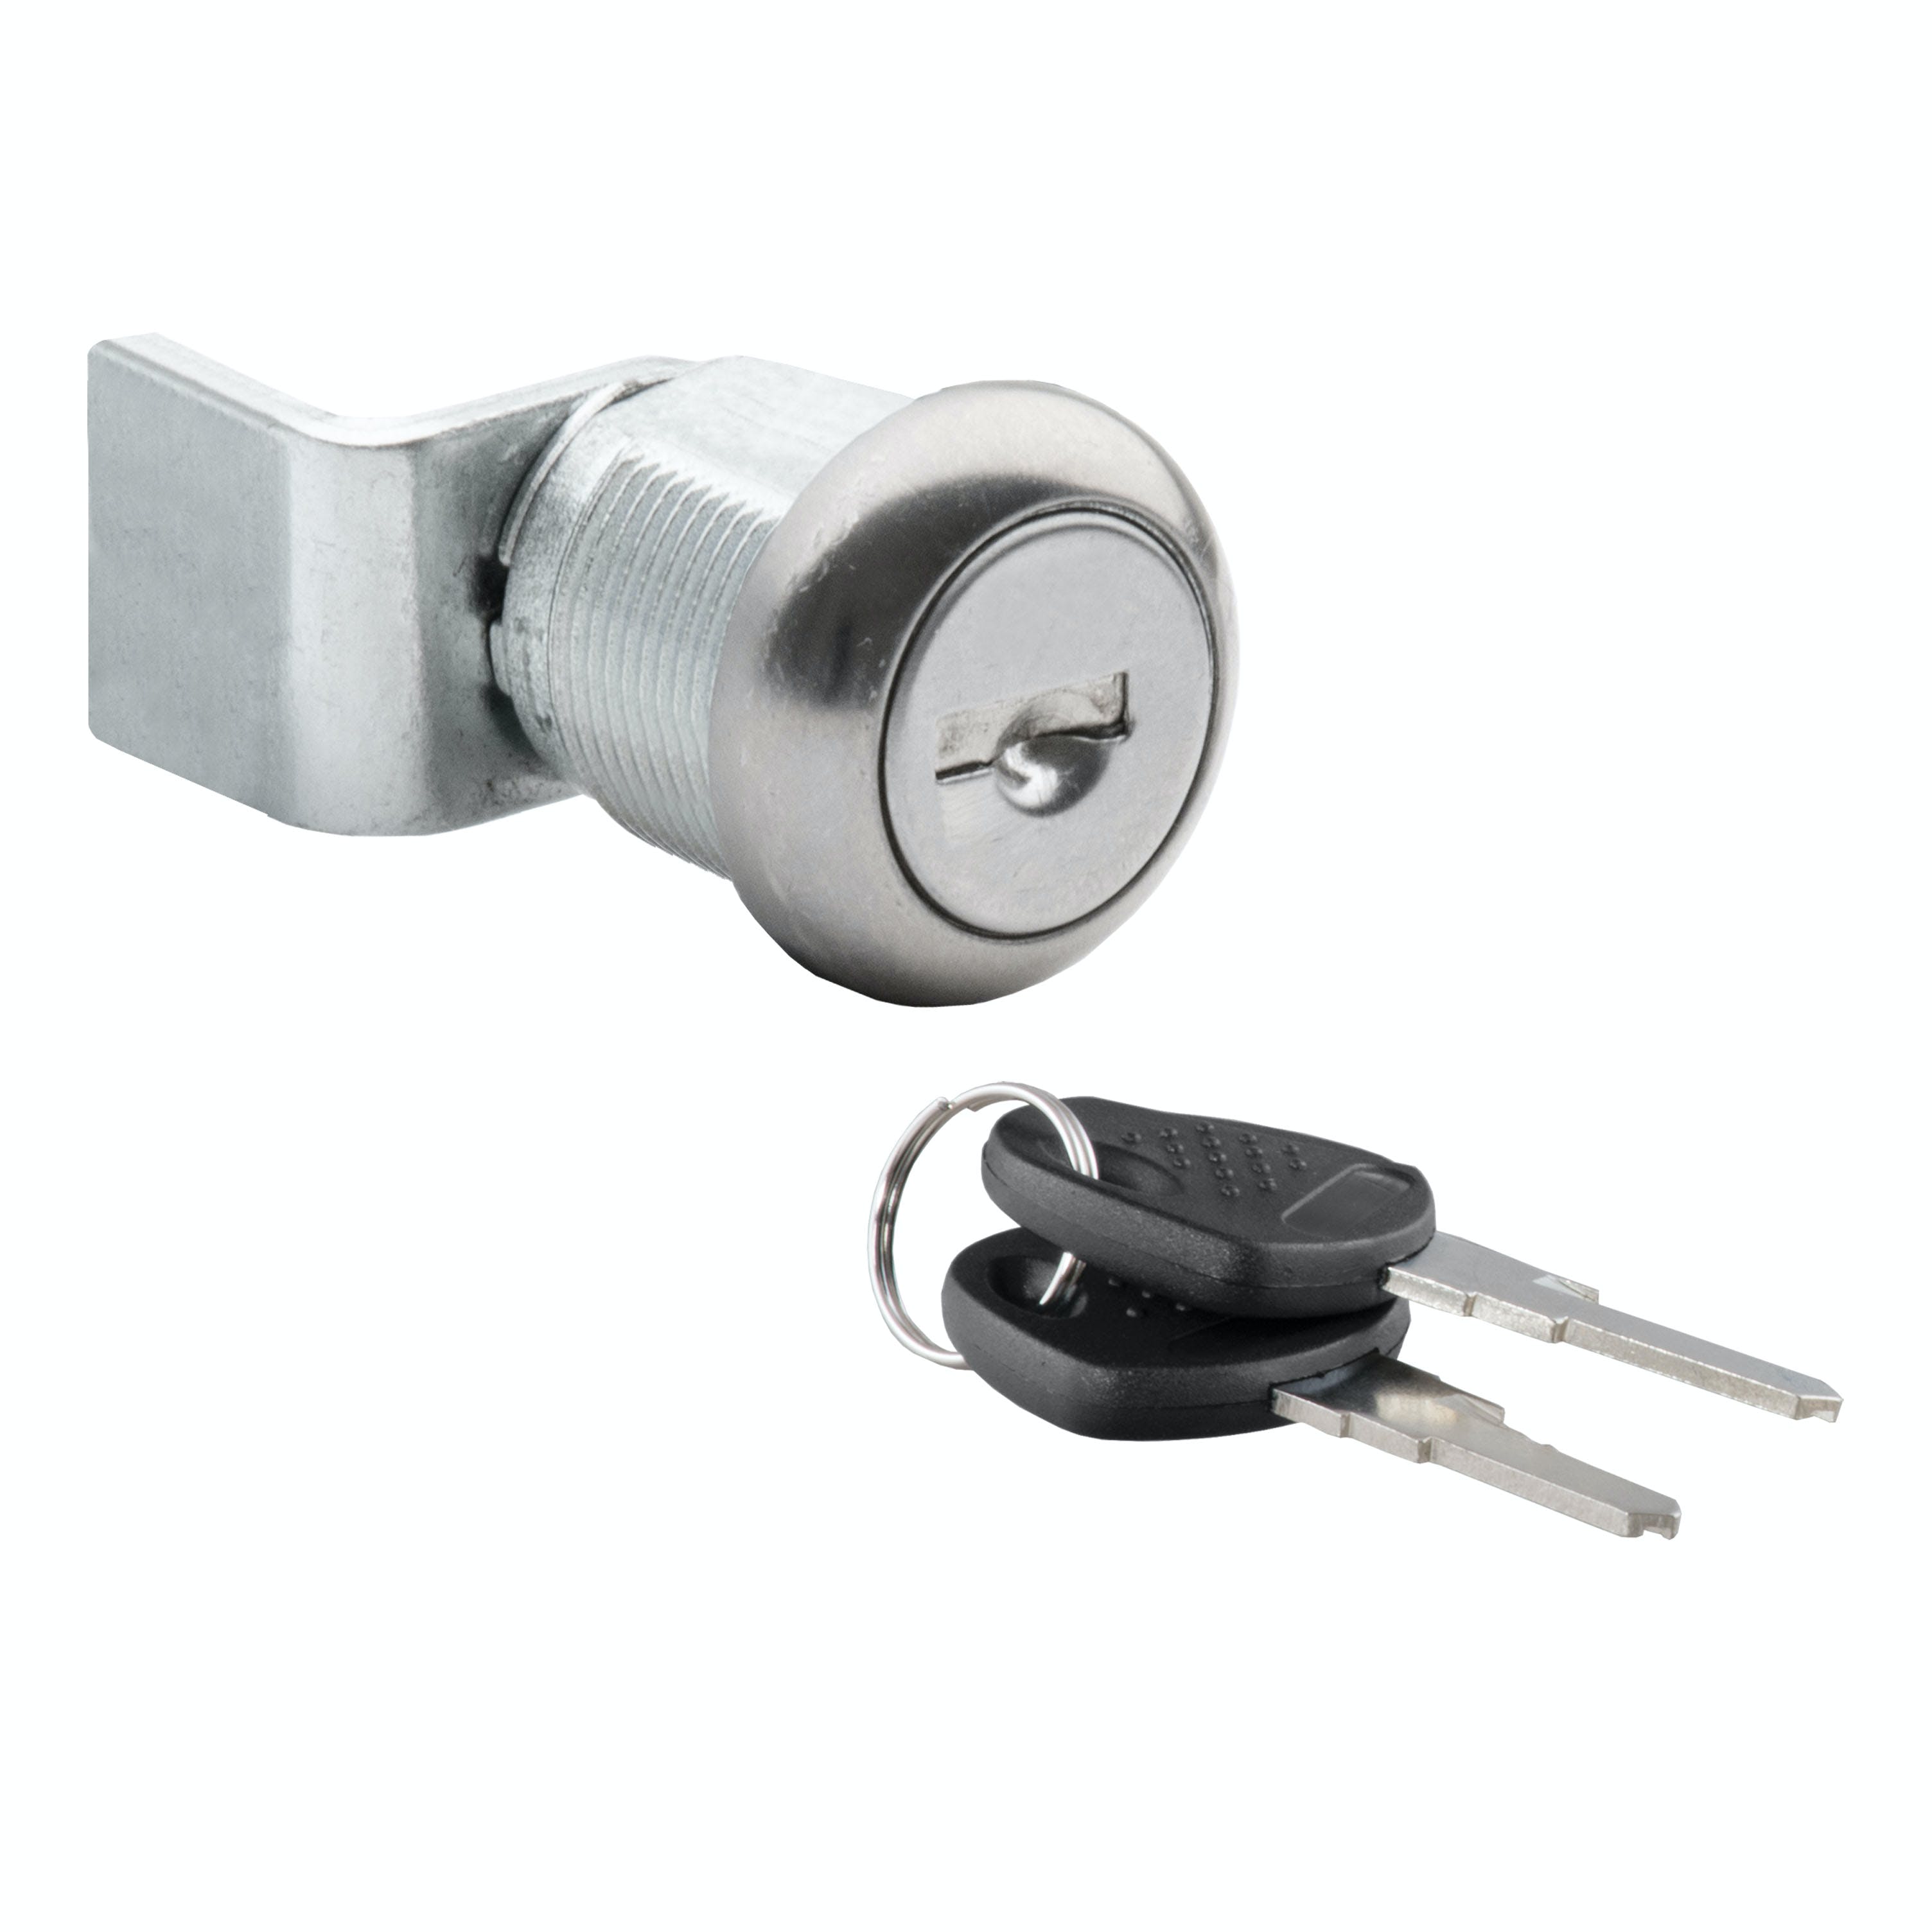 UWS 003-RYTHCY-001 Replacement T-Handle Lock Cylinder and Keys